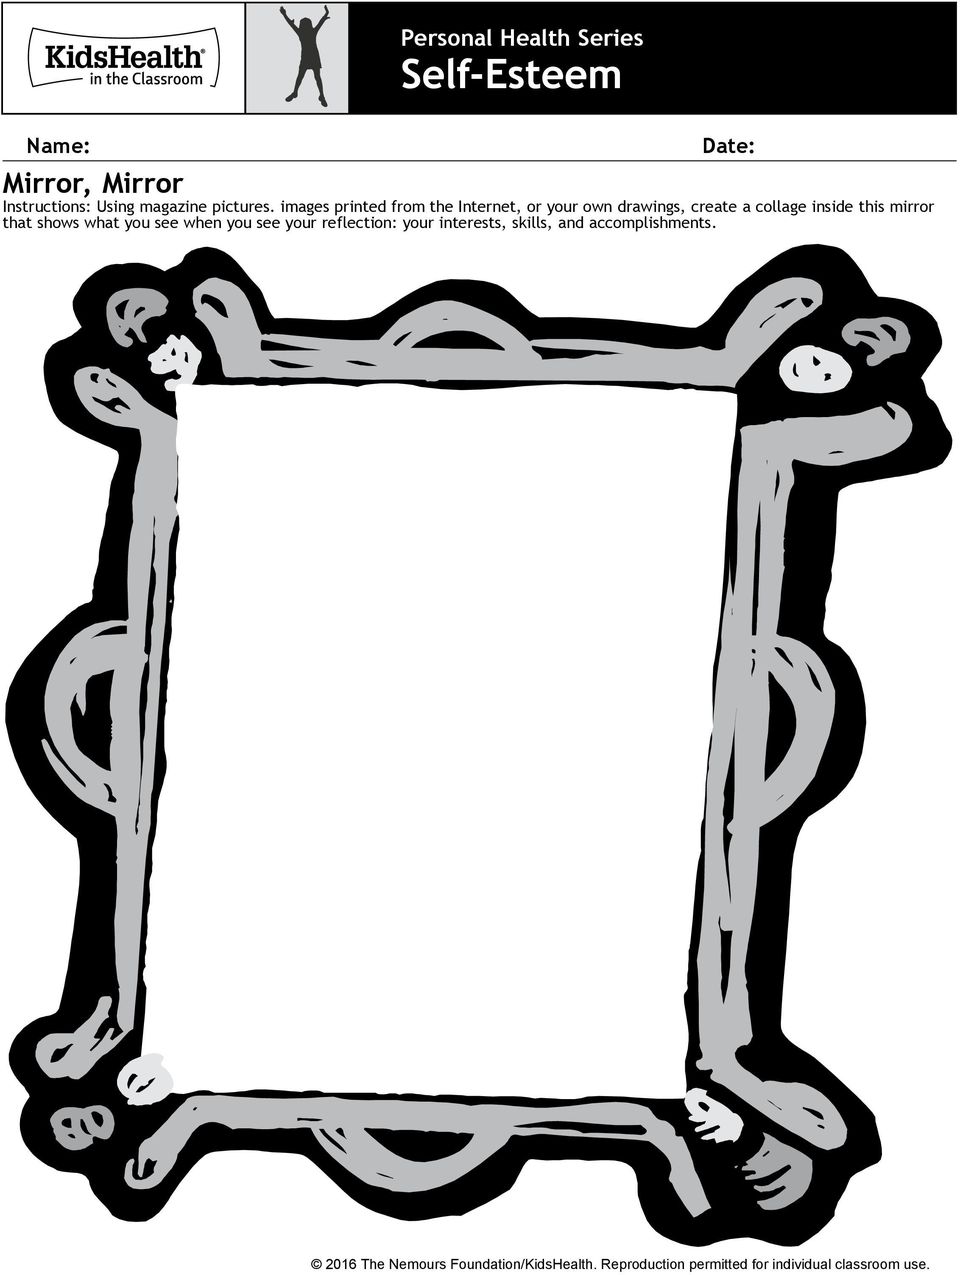 images printed from the Internet, or your own drawings, create a